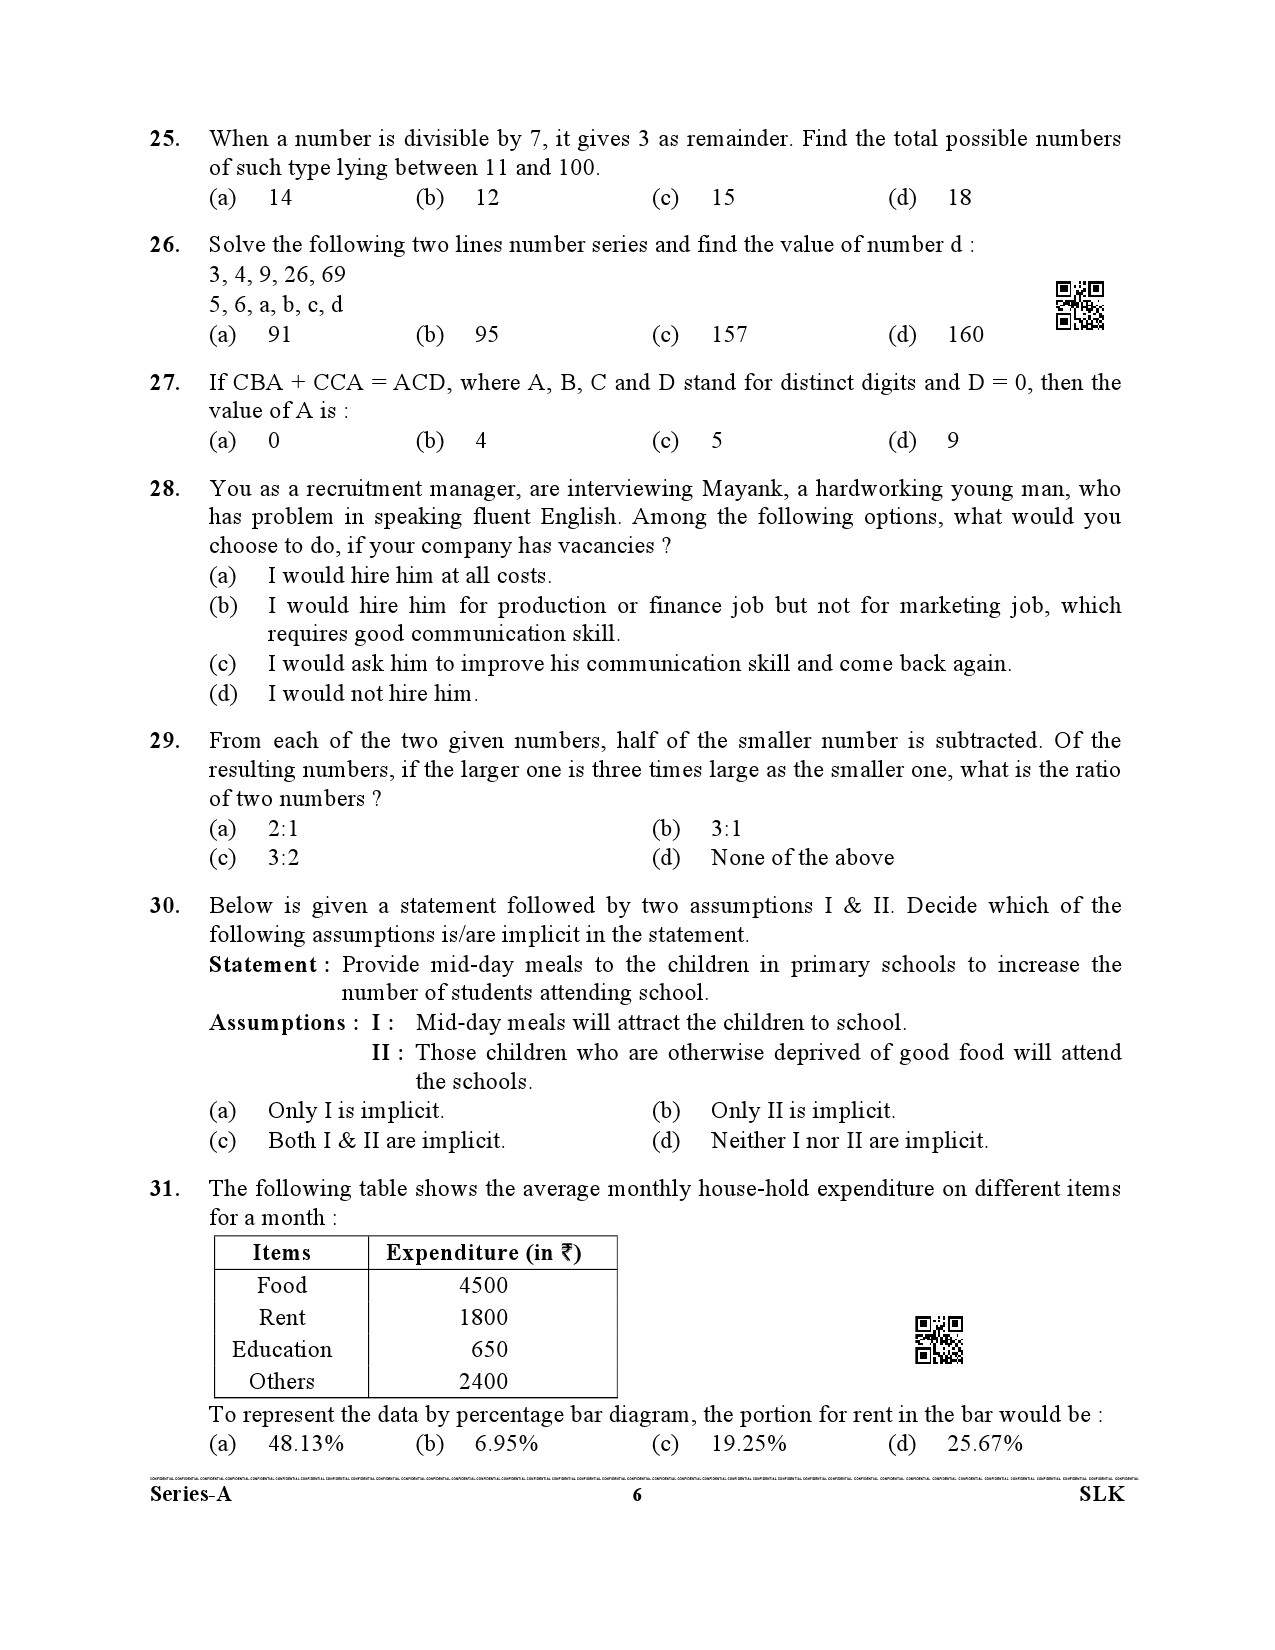 Uttarakhand Combined State Upper Subordinate Services Pre Exam 2021 Paper II 6